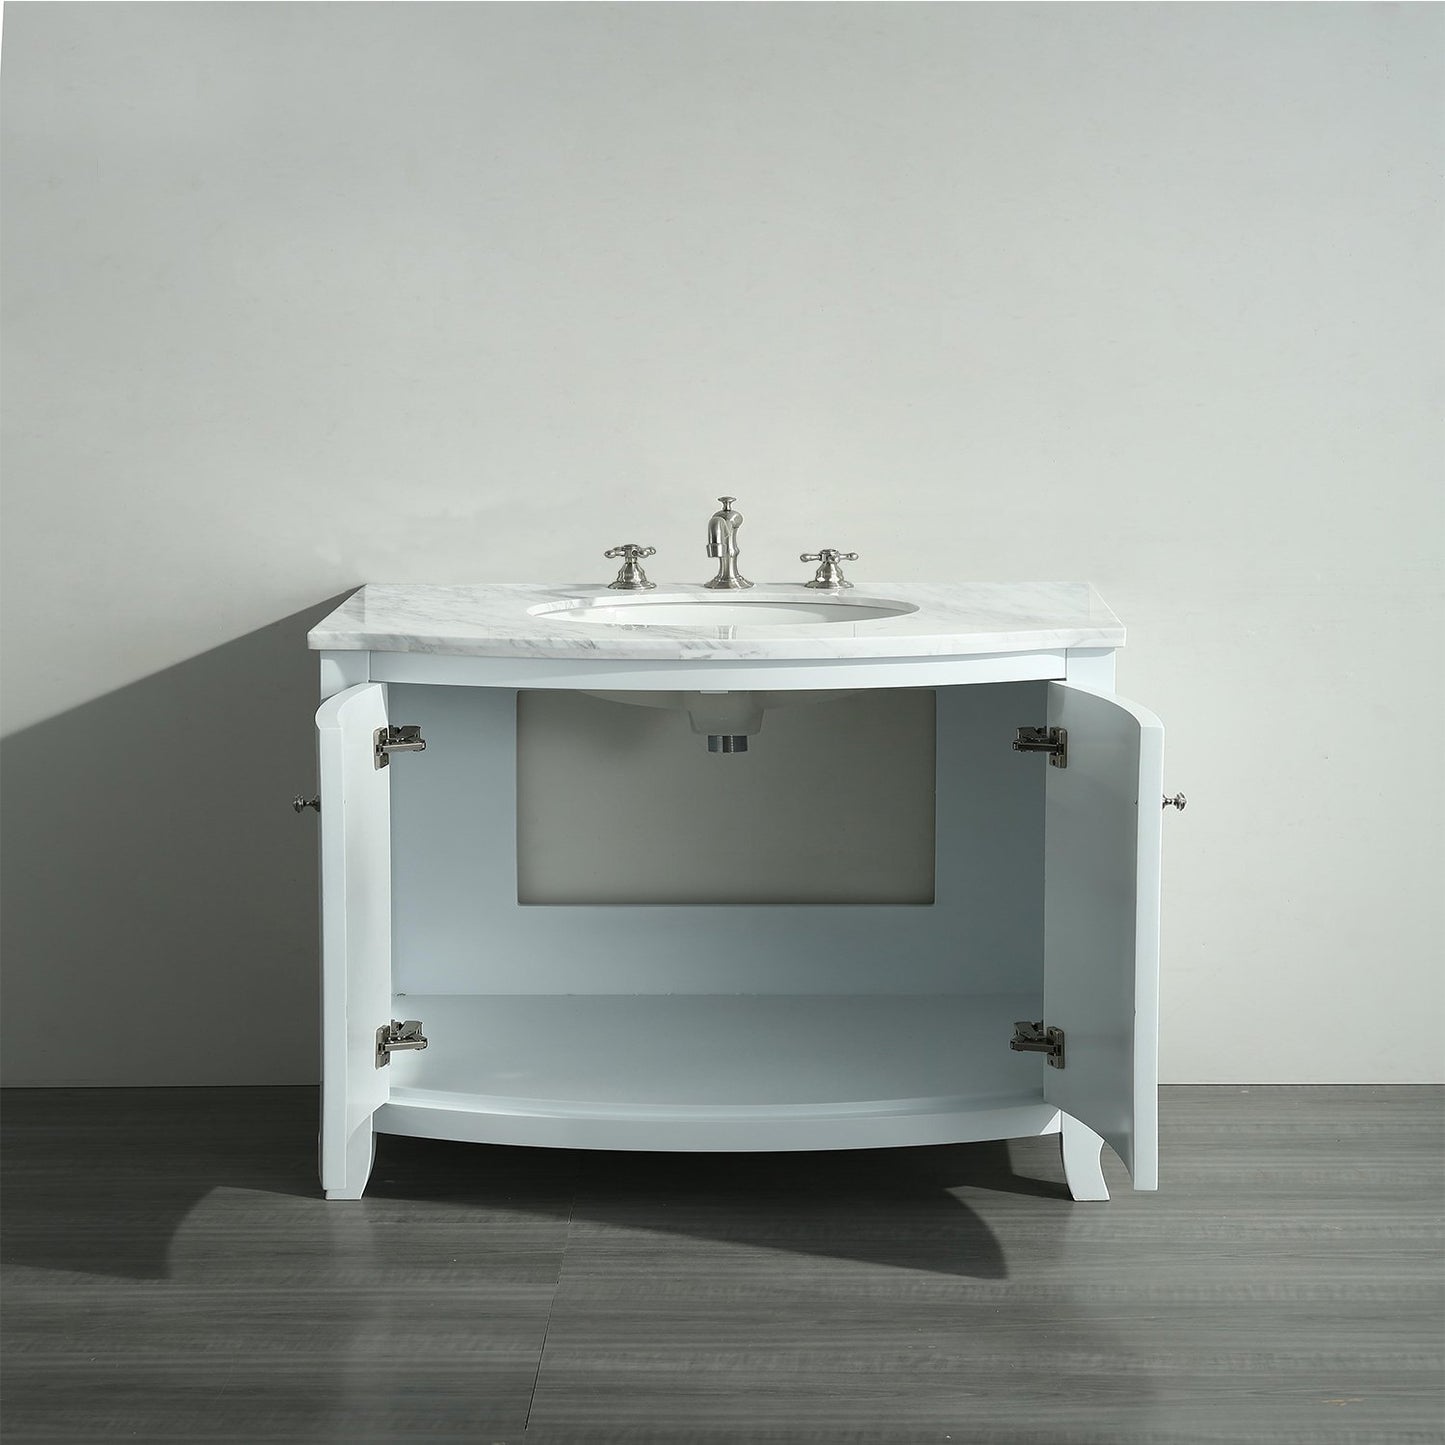 Eviva Odessa Zinx+ 24"  Bathroom Vanity with White Carrera Marble Counter-top and Porcelain Sink - Luxe Bathroom Vanities Luxury Bathroom Fixtures Bathroom Furniture